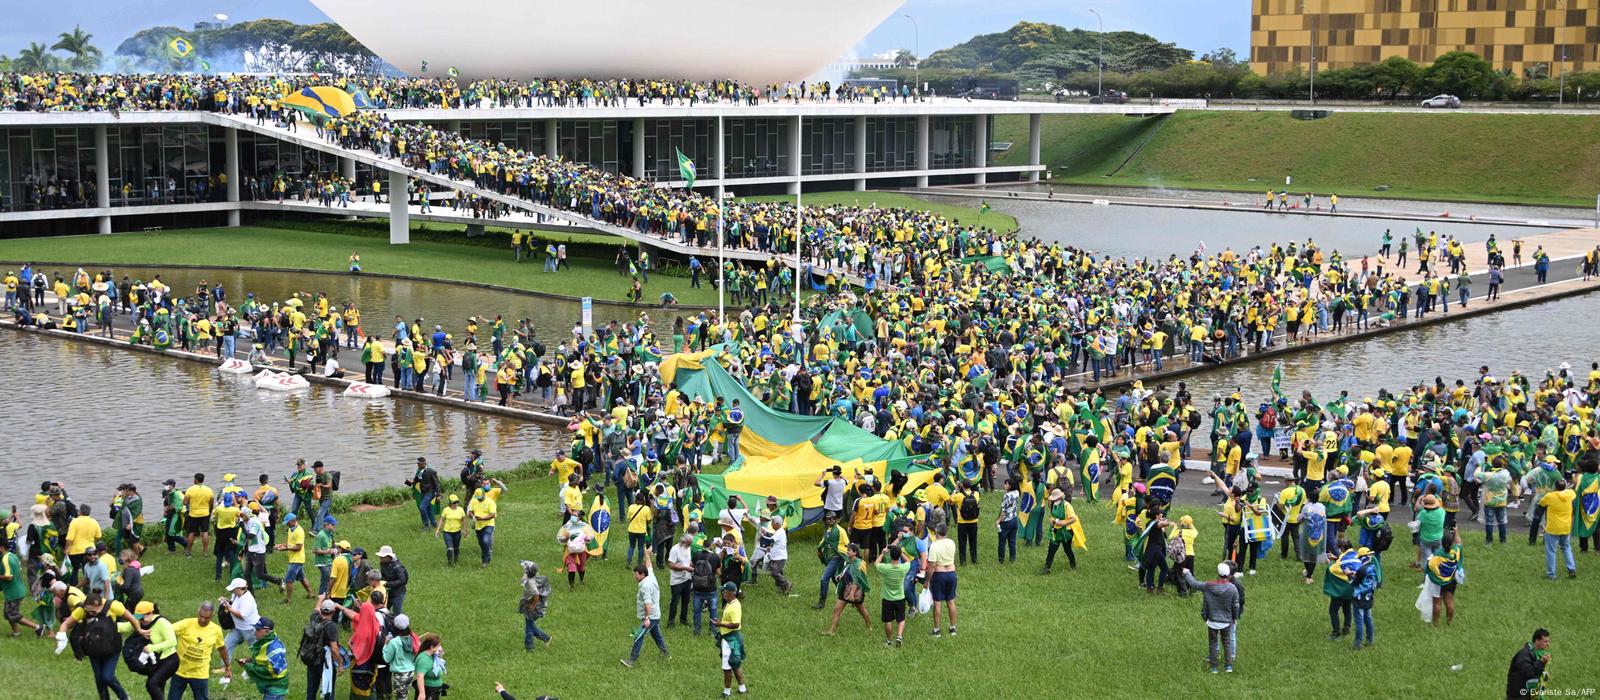 Bolsonaro supporters storm key government buildings in Brazil